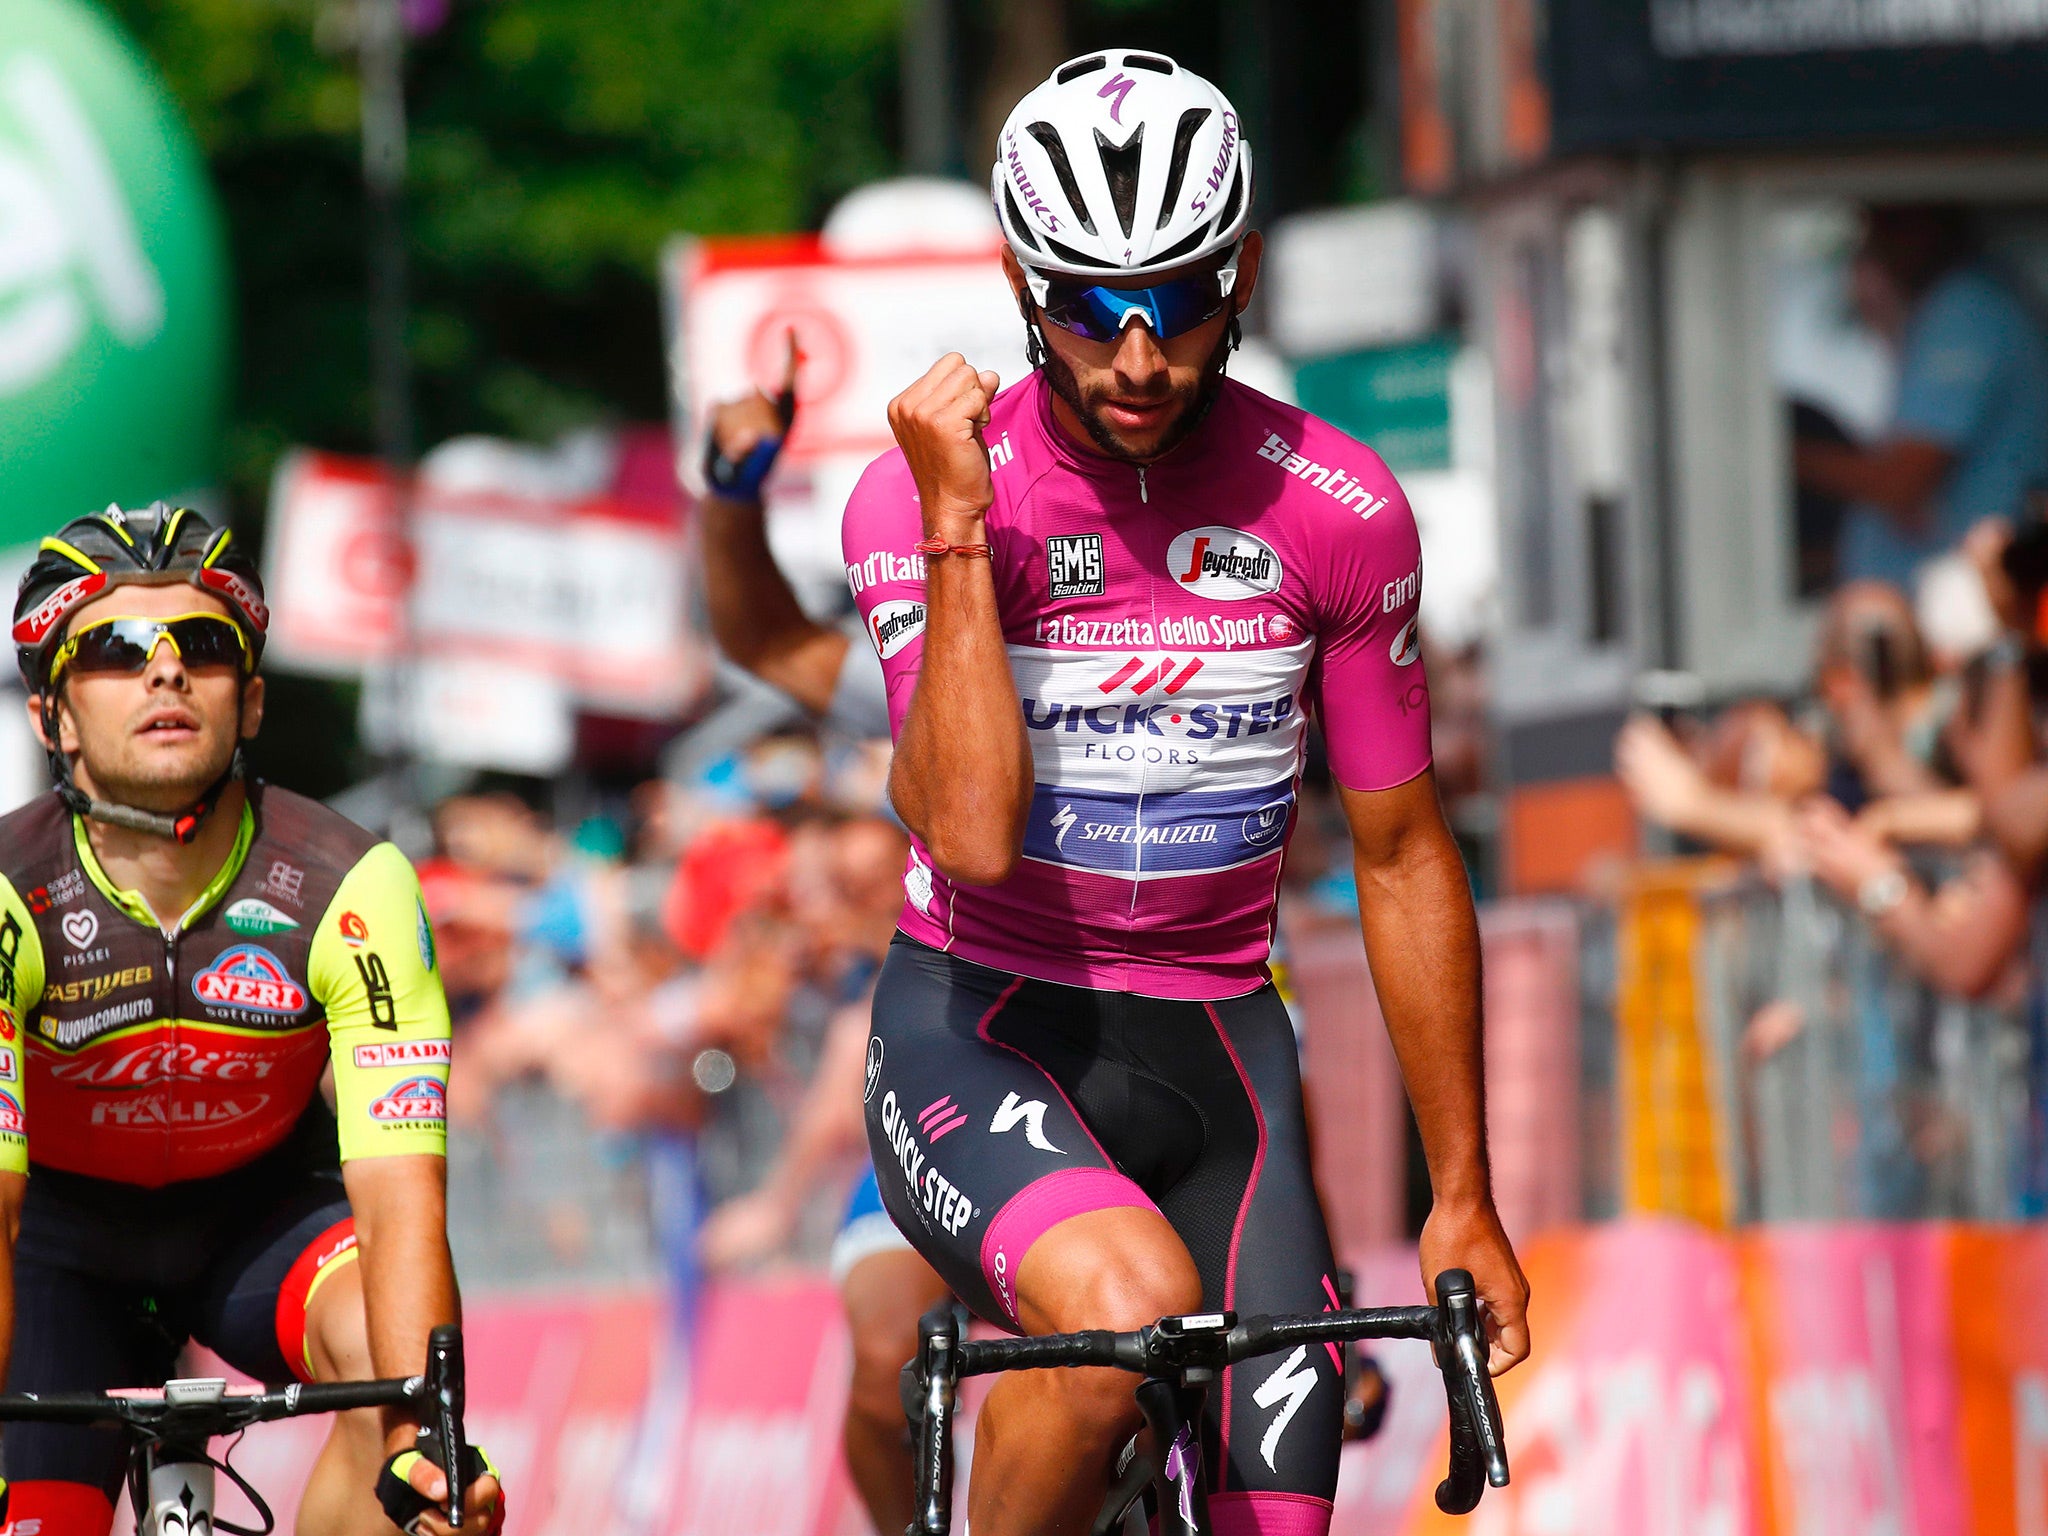 Fernando Gaviria burst clear at the end of the Giro's longest stage to claim his third win